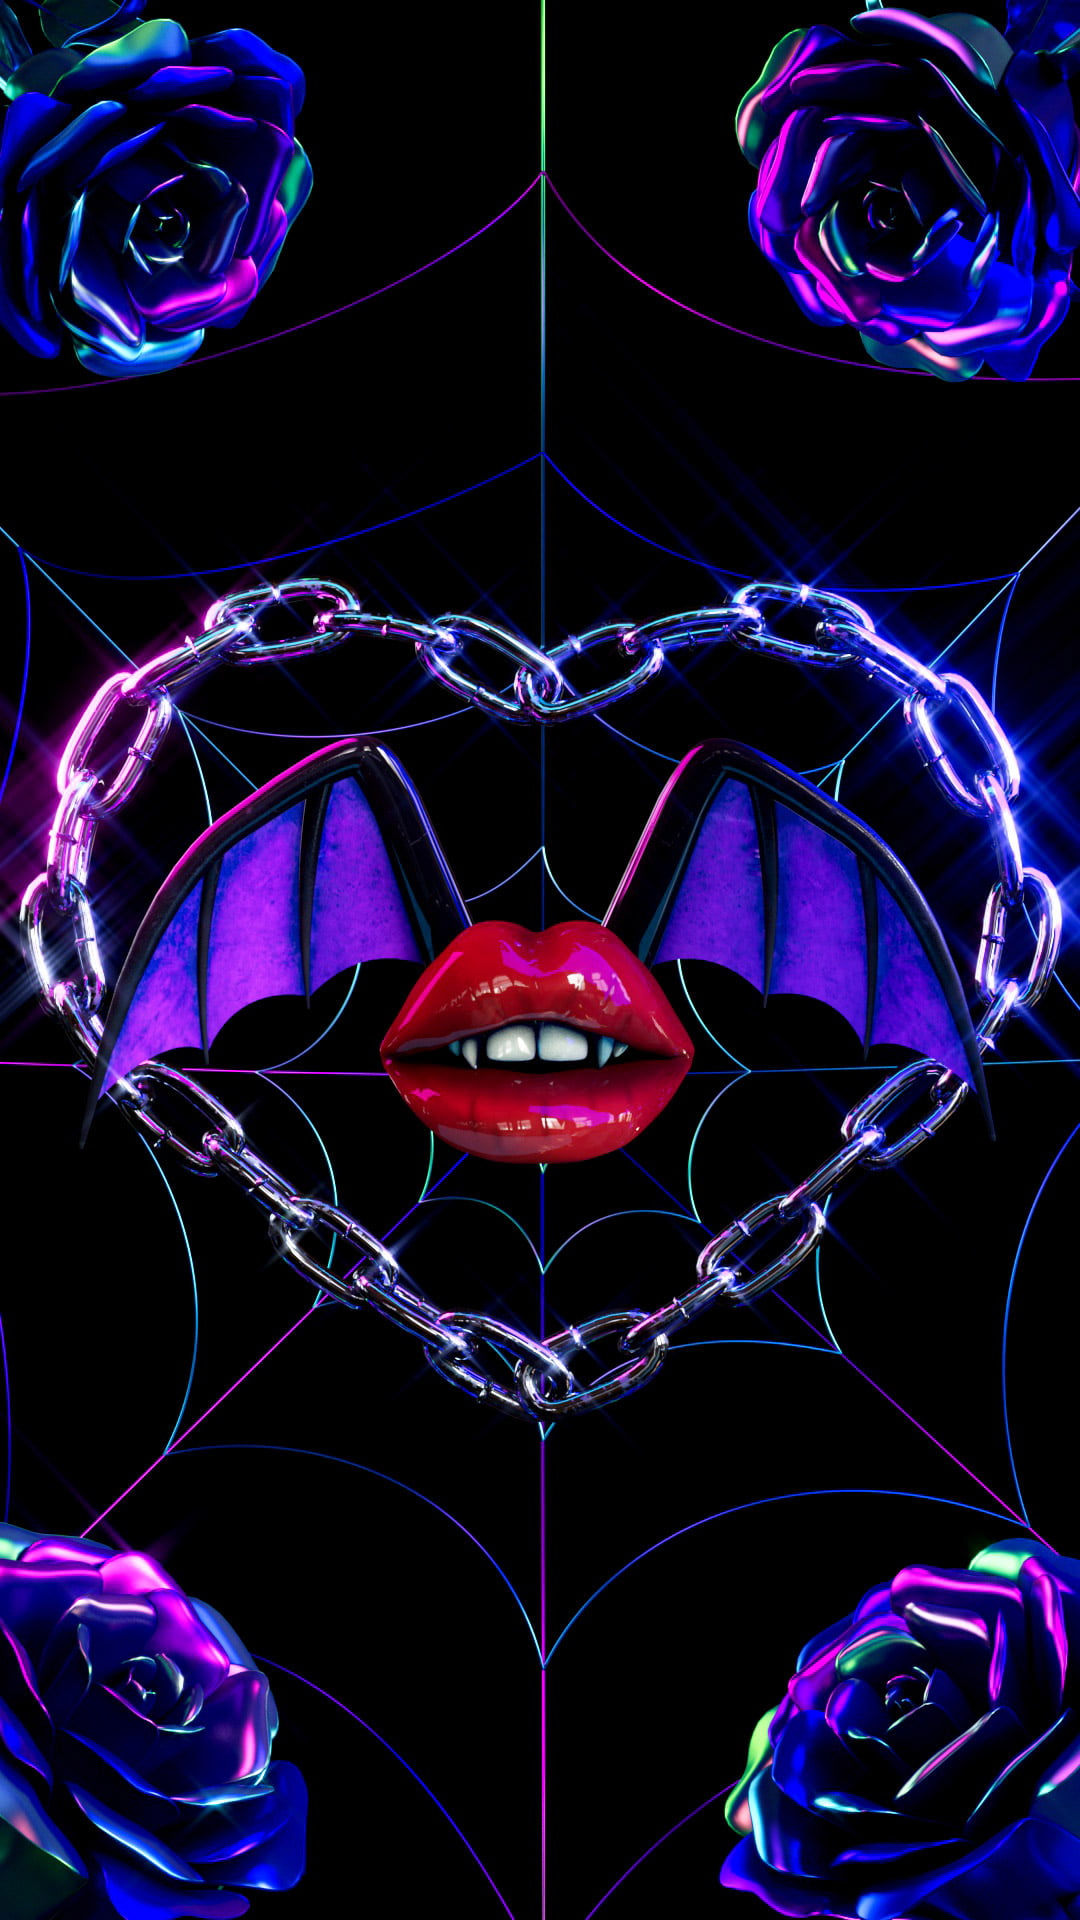 Black background with iridescent spiderweb filling the space. Metallic iridescent blue/magenta roses on all corners. A silver heart shaped chain in the center framing juicy red lipstick lips with fangs and black and purple webbed bat wings. Wallpaper 04